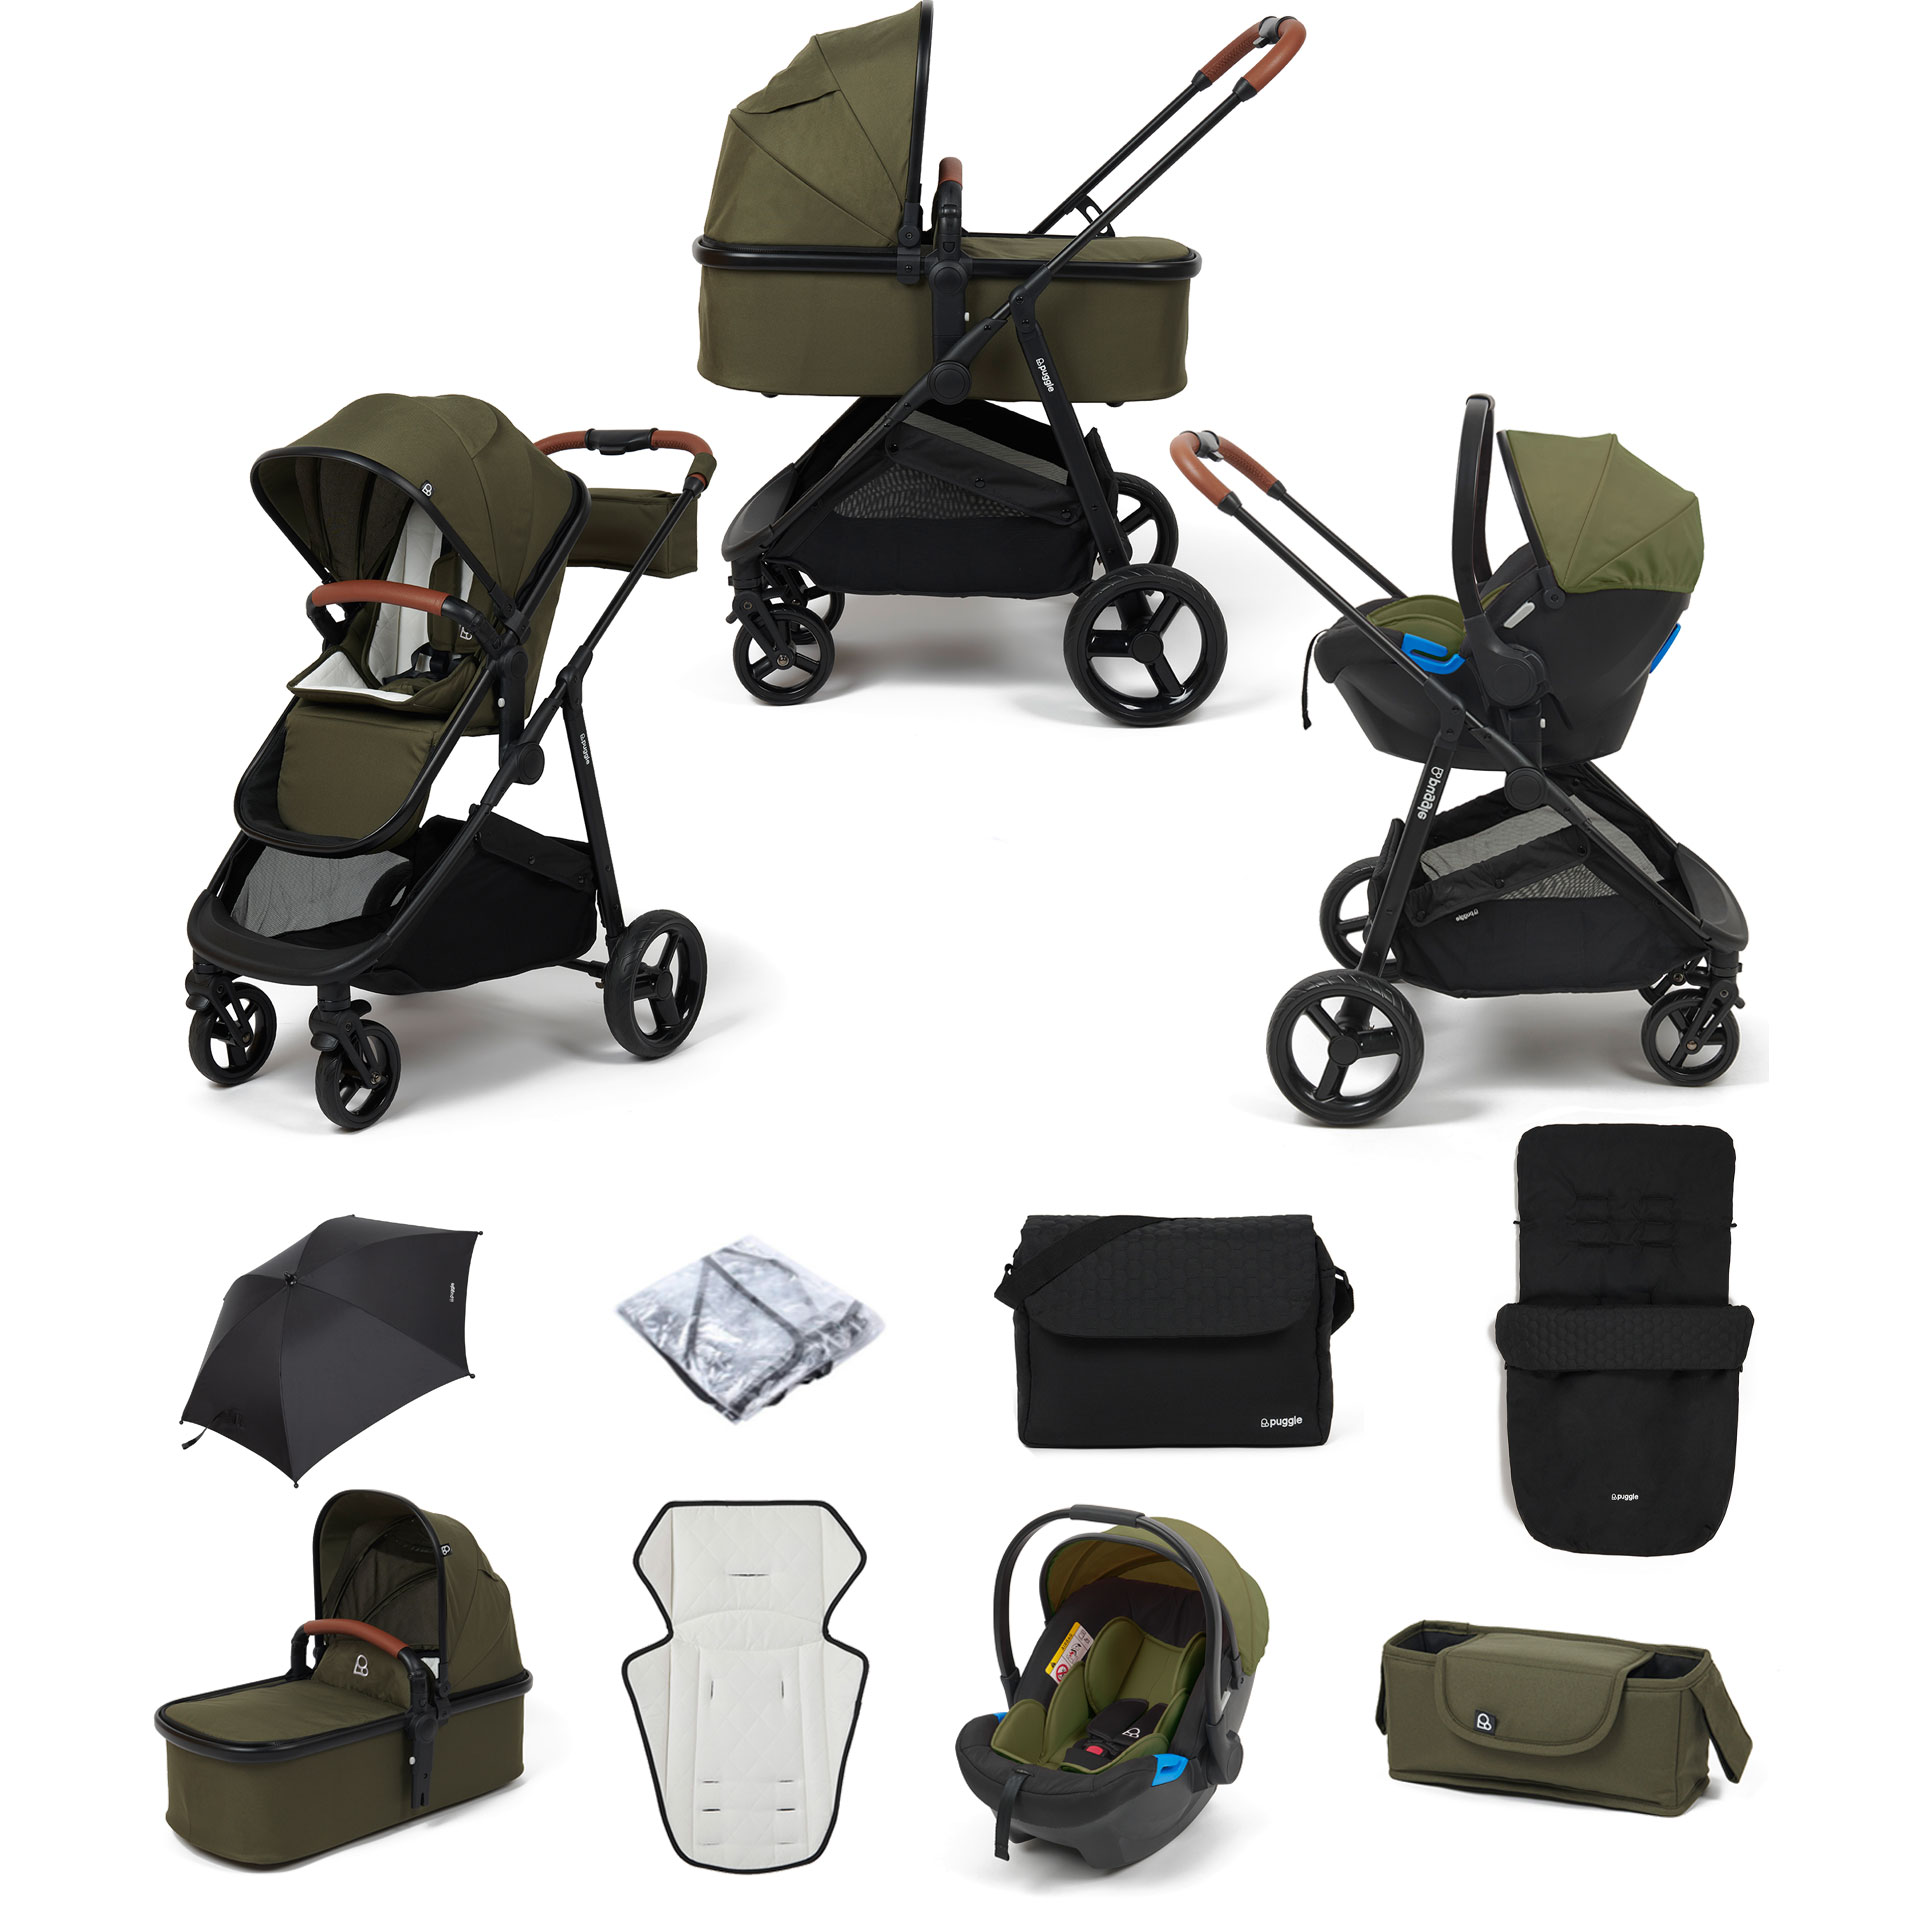 Puggle Monaco XT 3in1 Travel System with Organiser, Footmuff, Parasol & Changing Bag - Forest Green